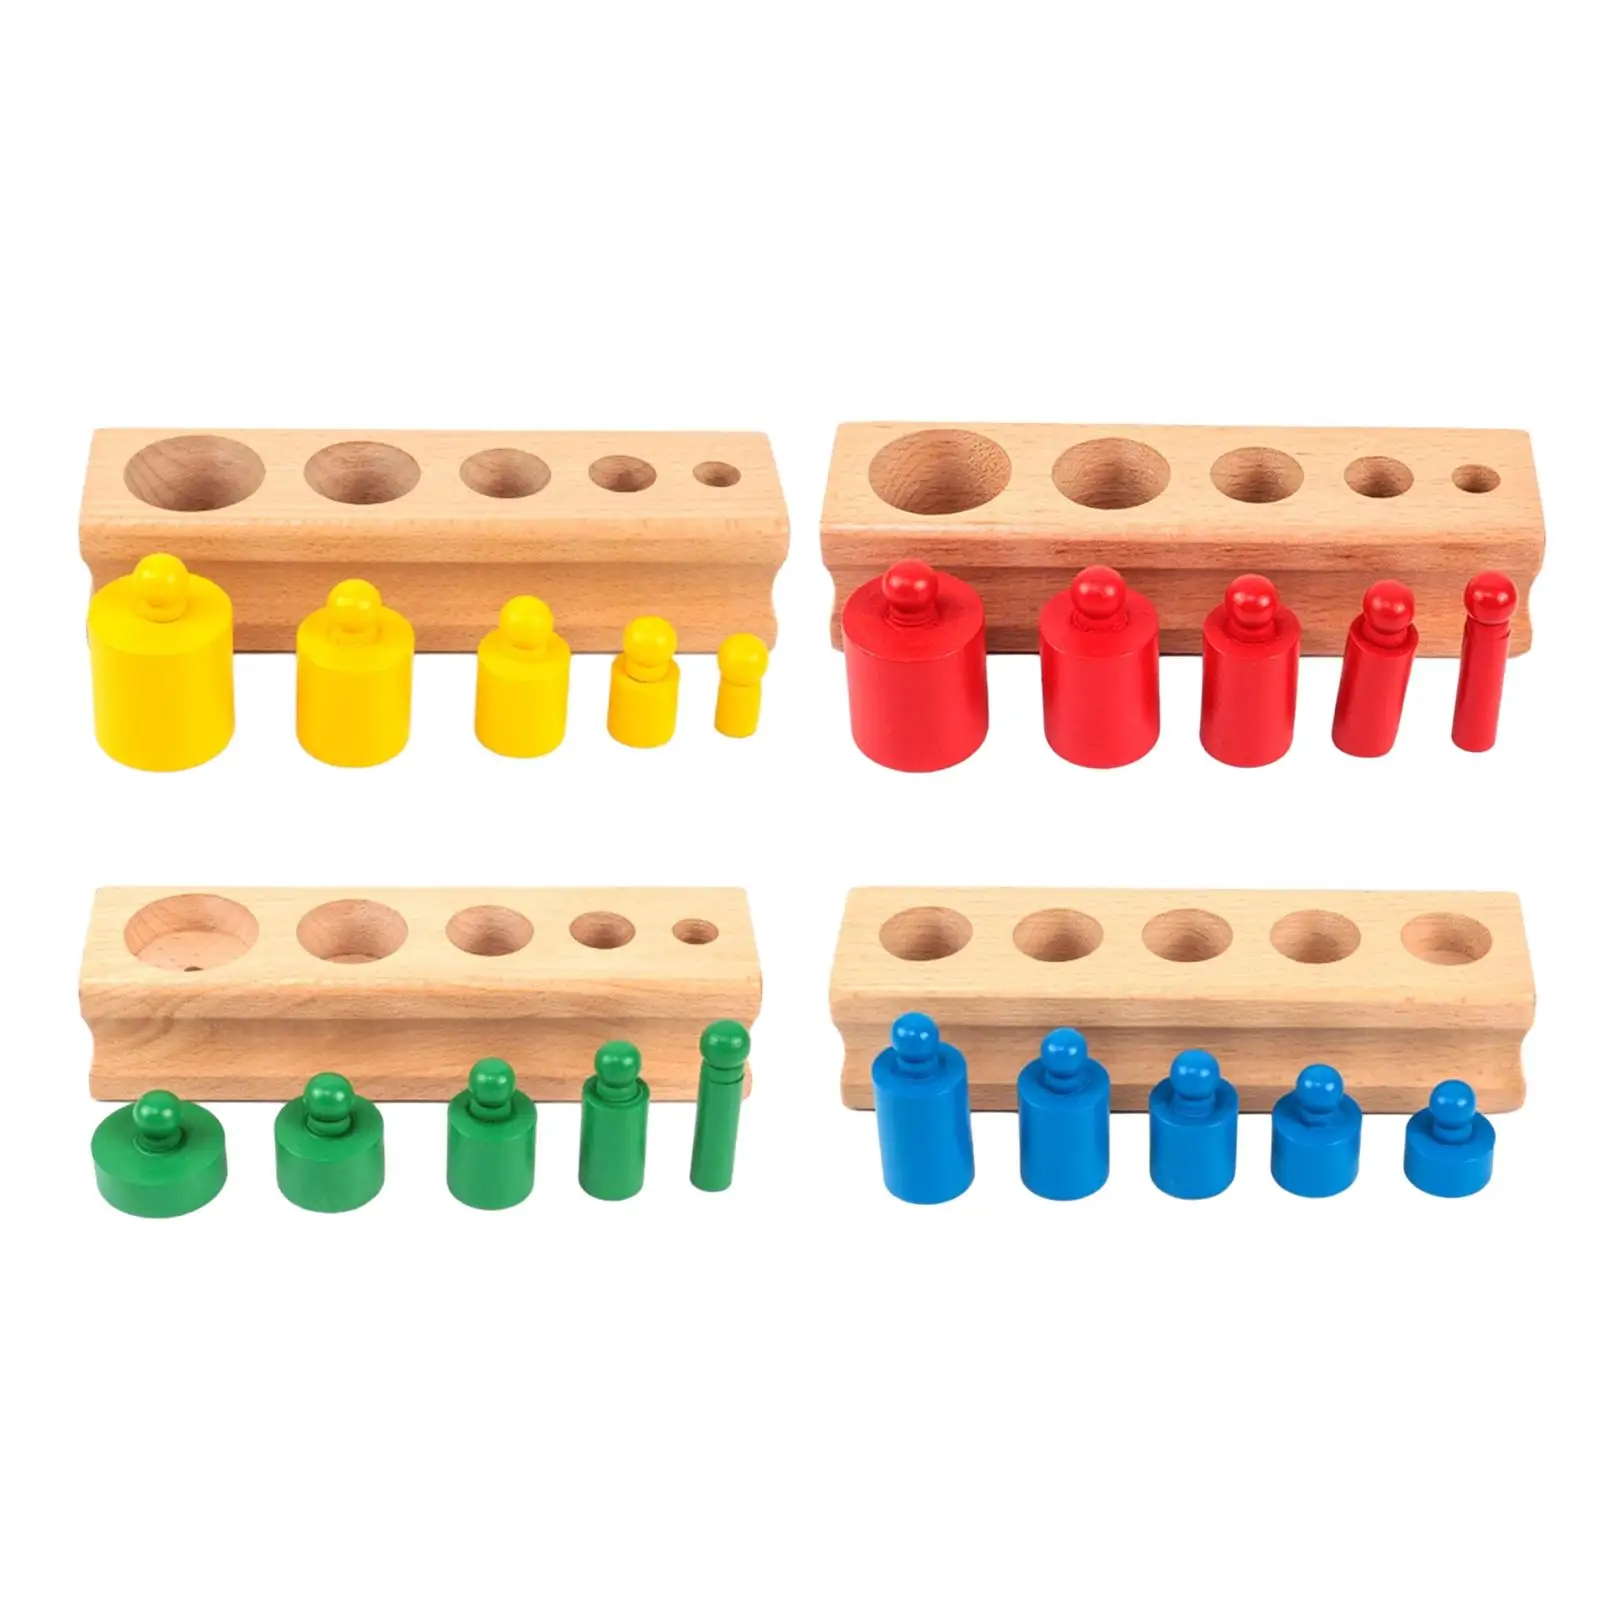 4 Pieces Knobbed Cylinders Blocks Socket Shape & Color Recognition Colorful Montessori Toy for Preschool Toys School Home Baby